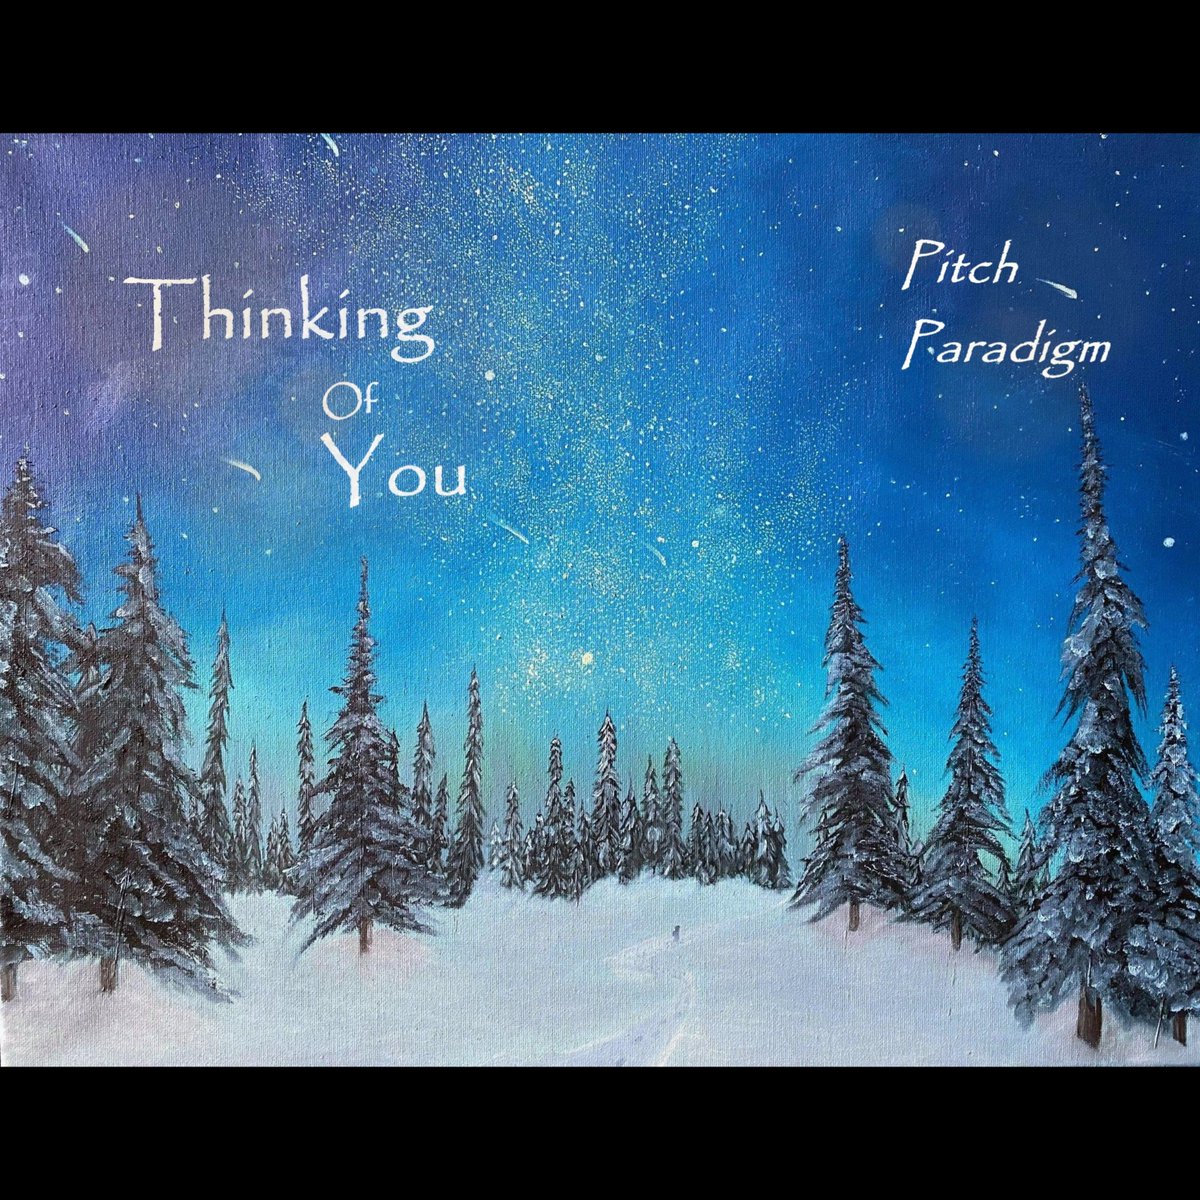 I am so happy to announce the official release date of my new album 'Thinking of You'.
Available: 5-17-2024
#fypviraltwitter #FYP #fypシ #art #singers #songwriter #music #Spotify #appleradio #iHeartRadio #AmazonMusic #YouTube #PitchParadigm #popmusic #Album #RisingStars #radio